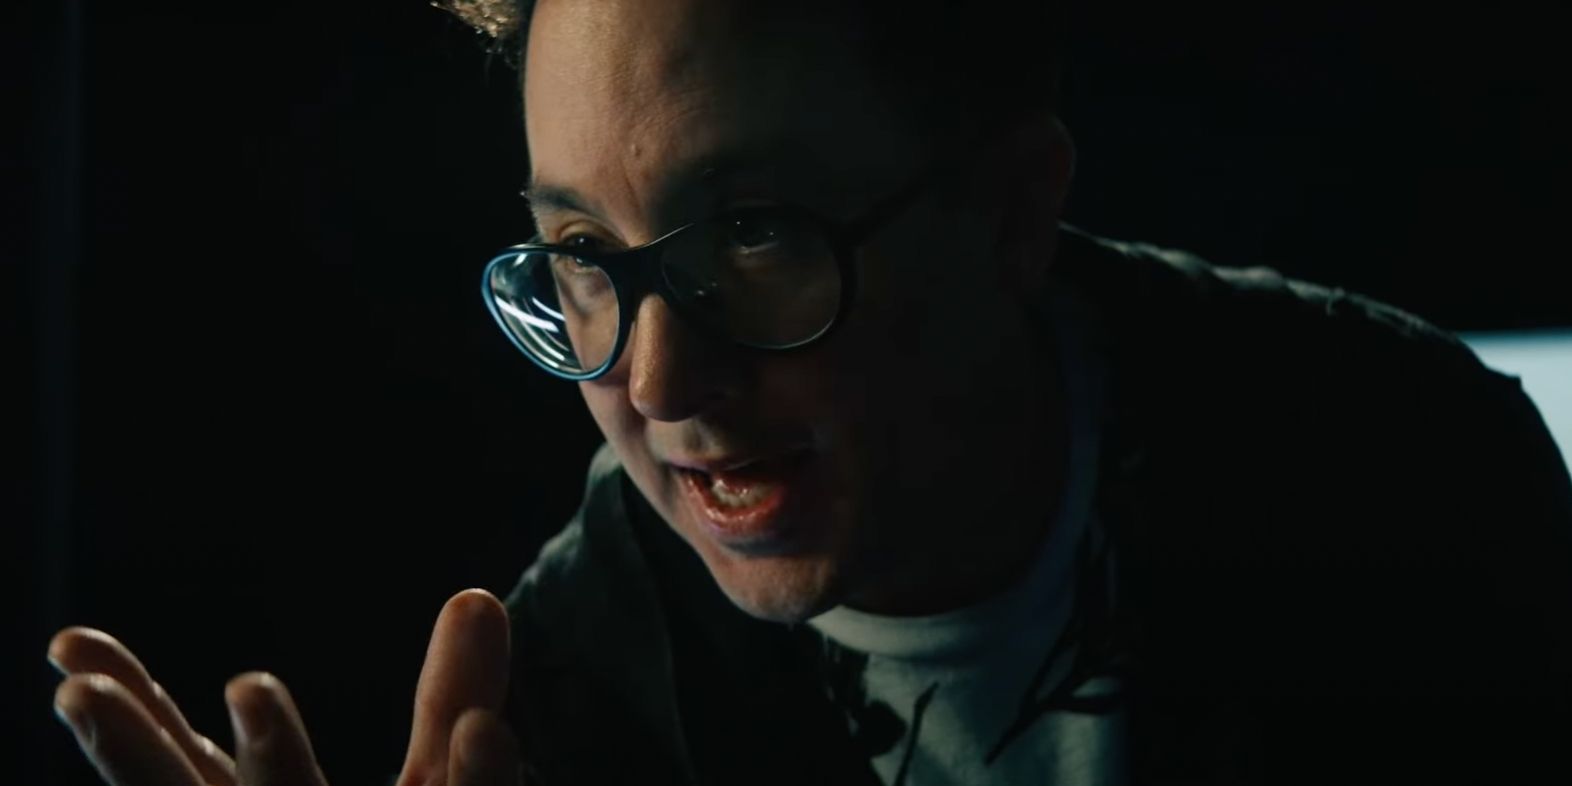 P.J. Byrne as The Boys character Adam looking sinister in Gen V teaser